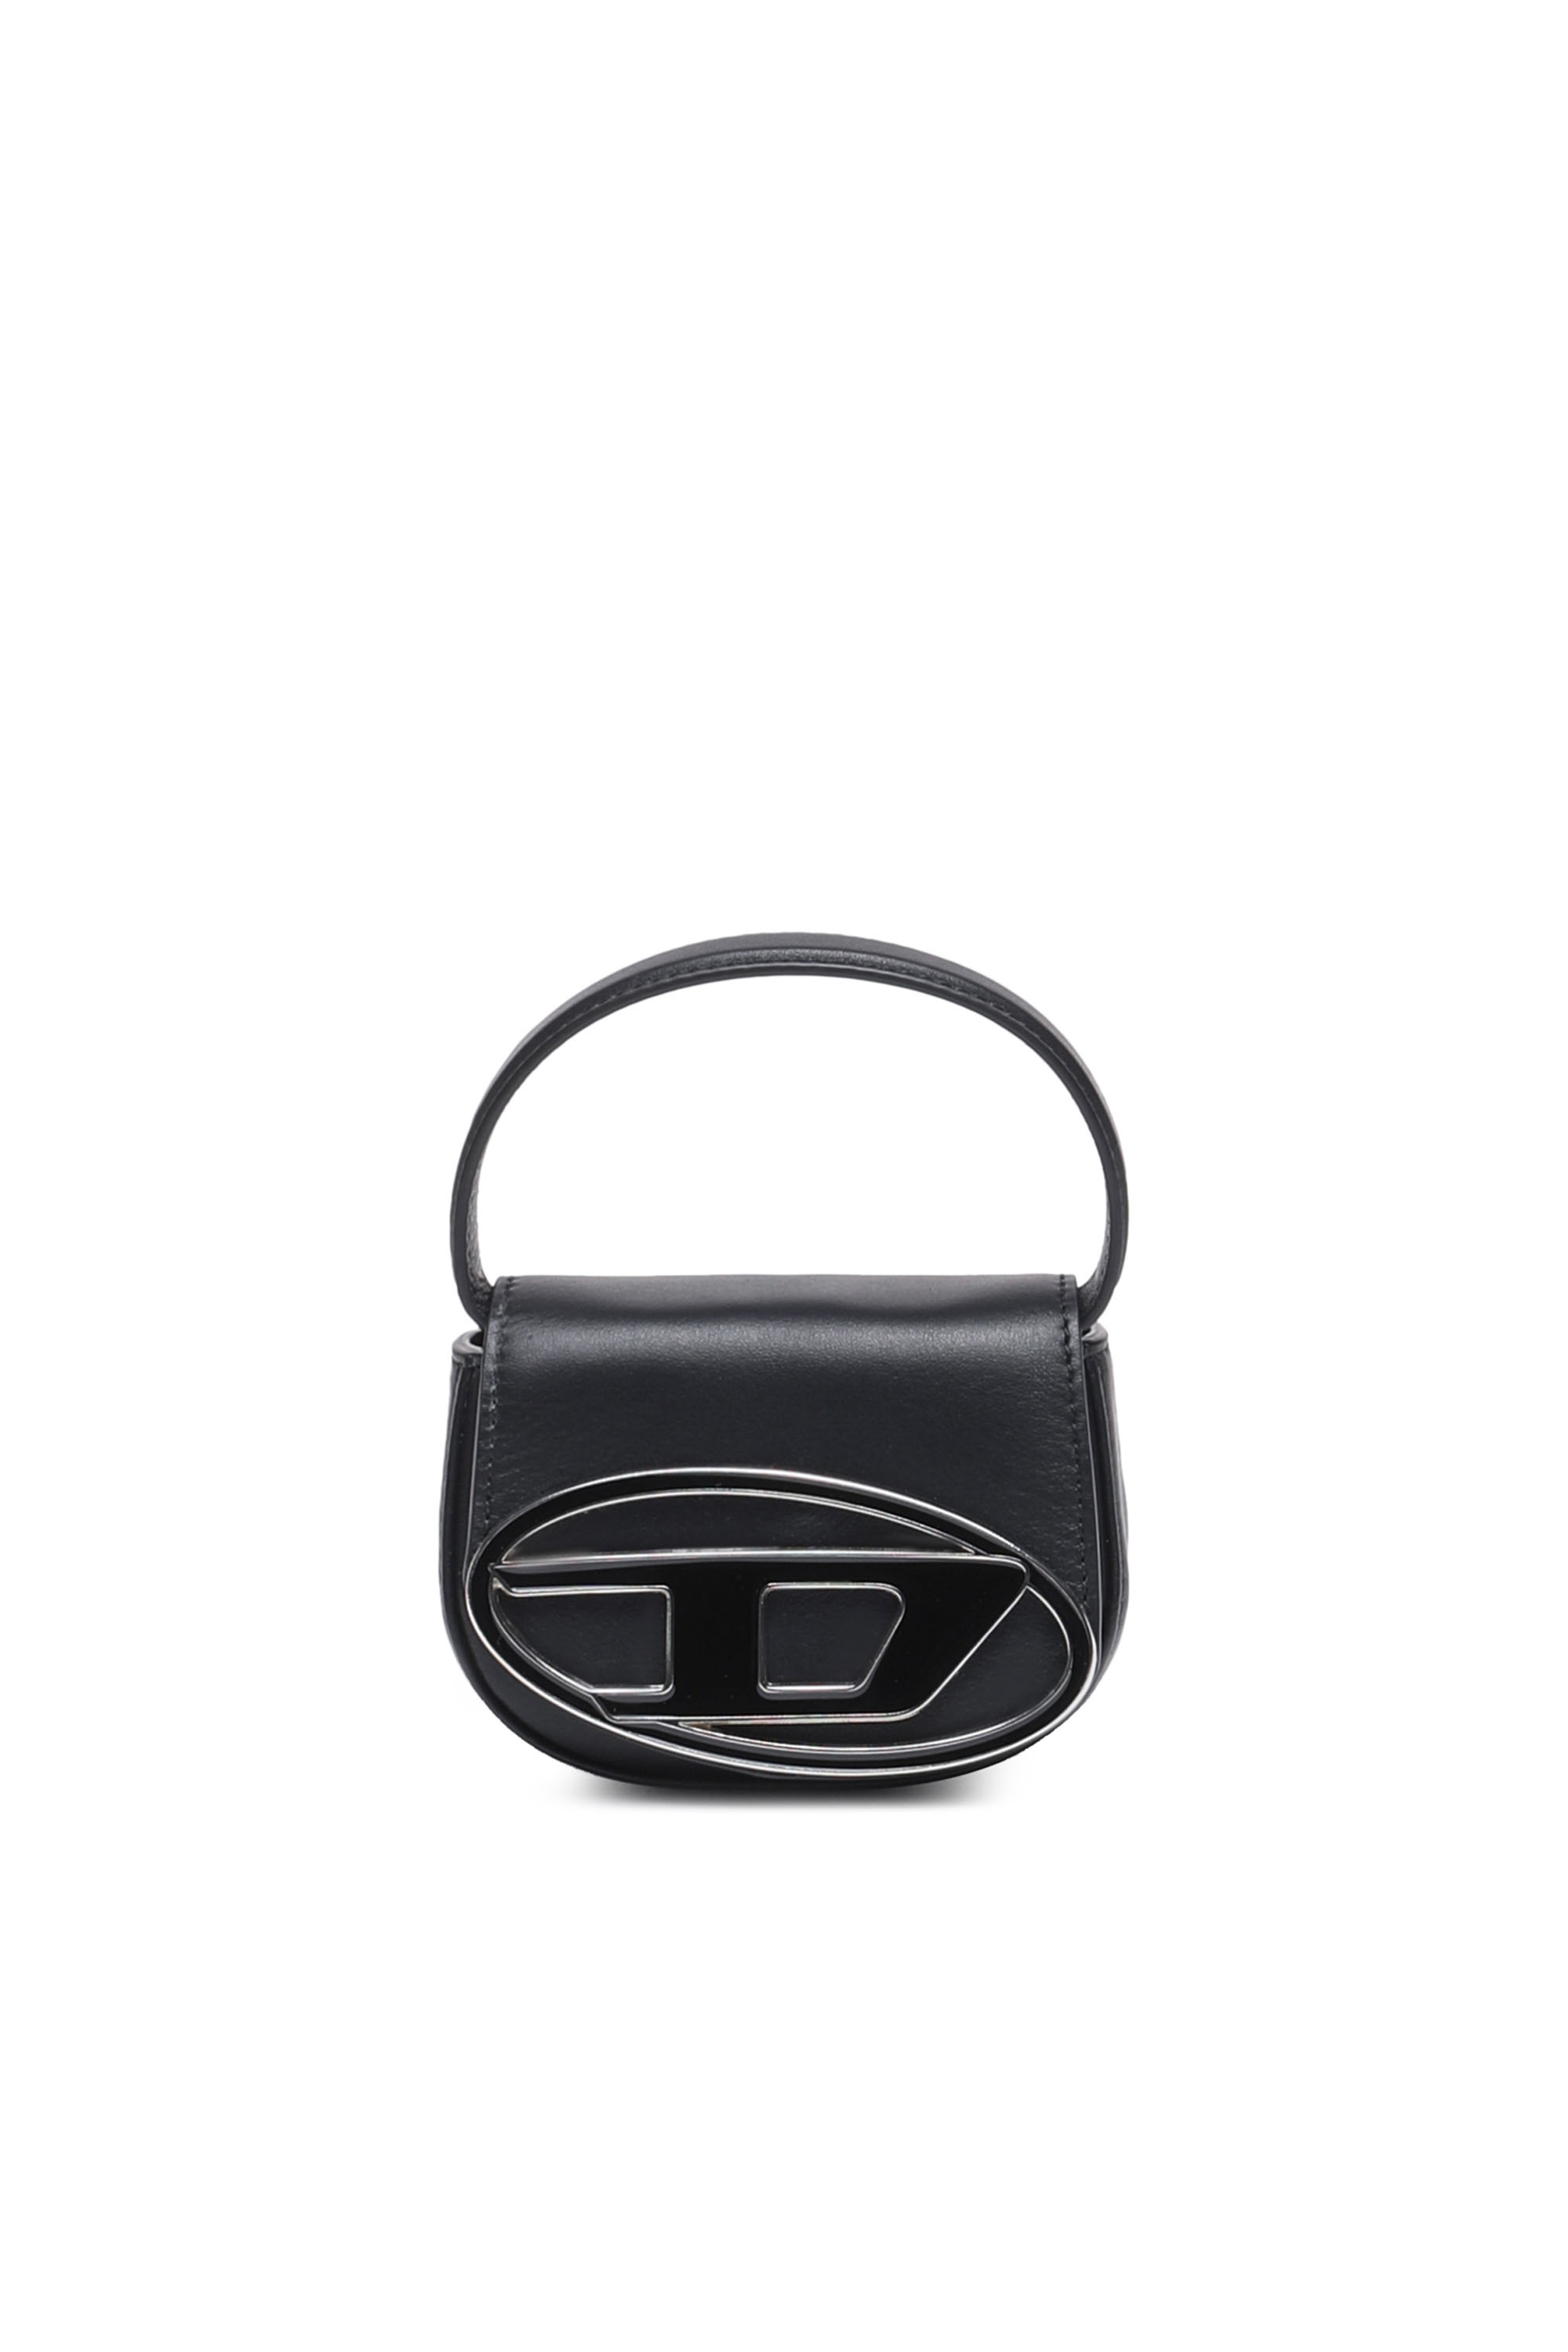 Women's Shopping and Shoulder Bags: Reversible | Diesel®